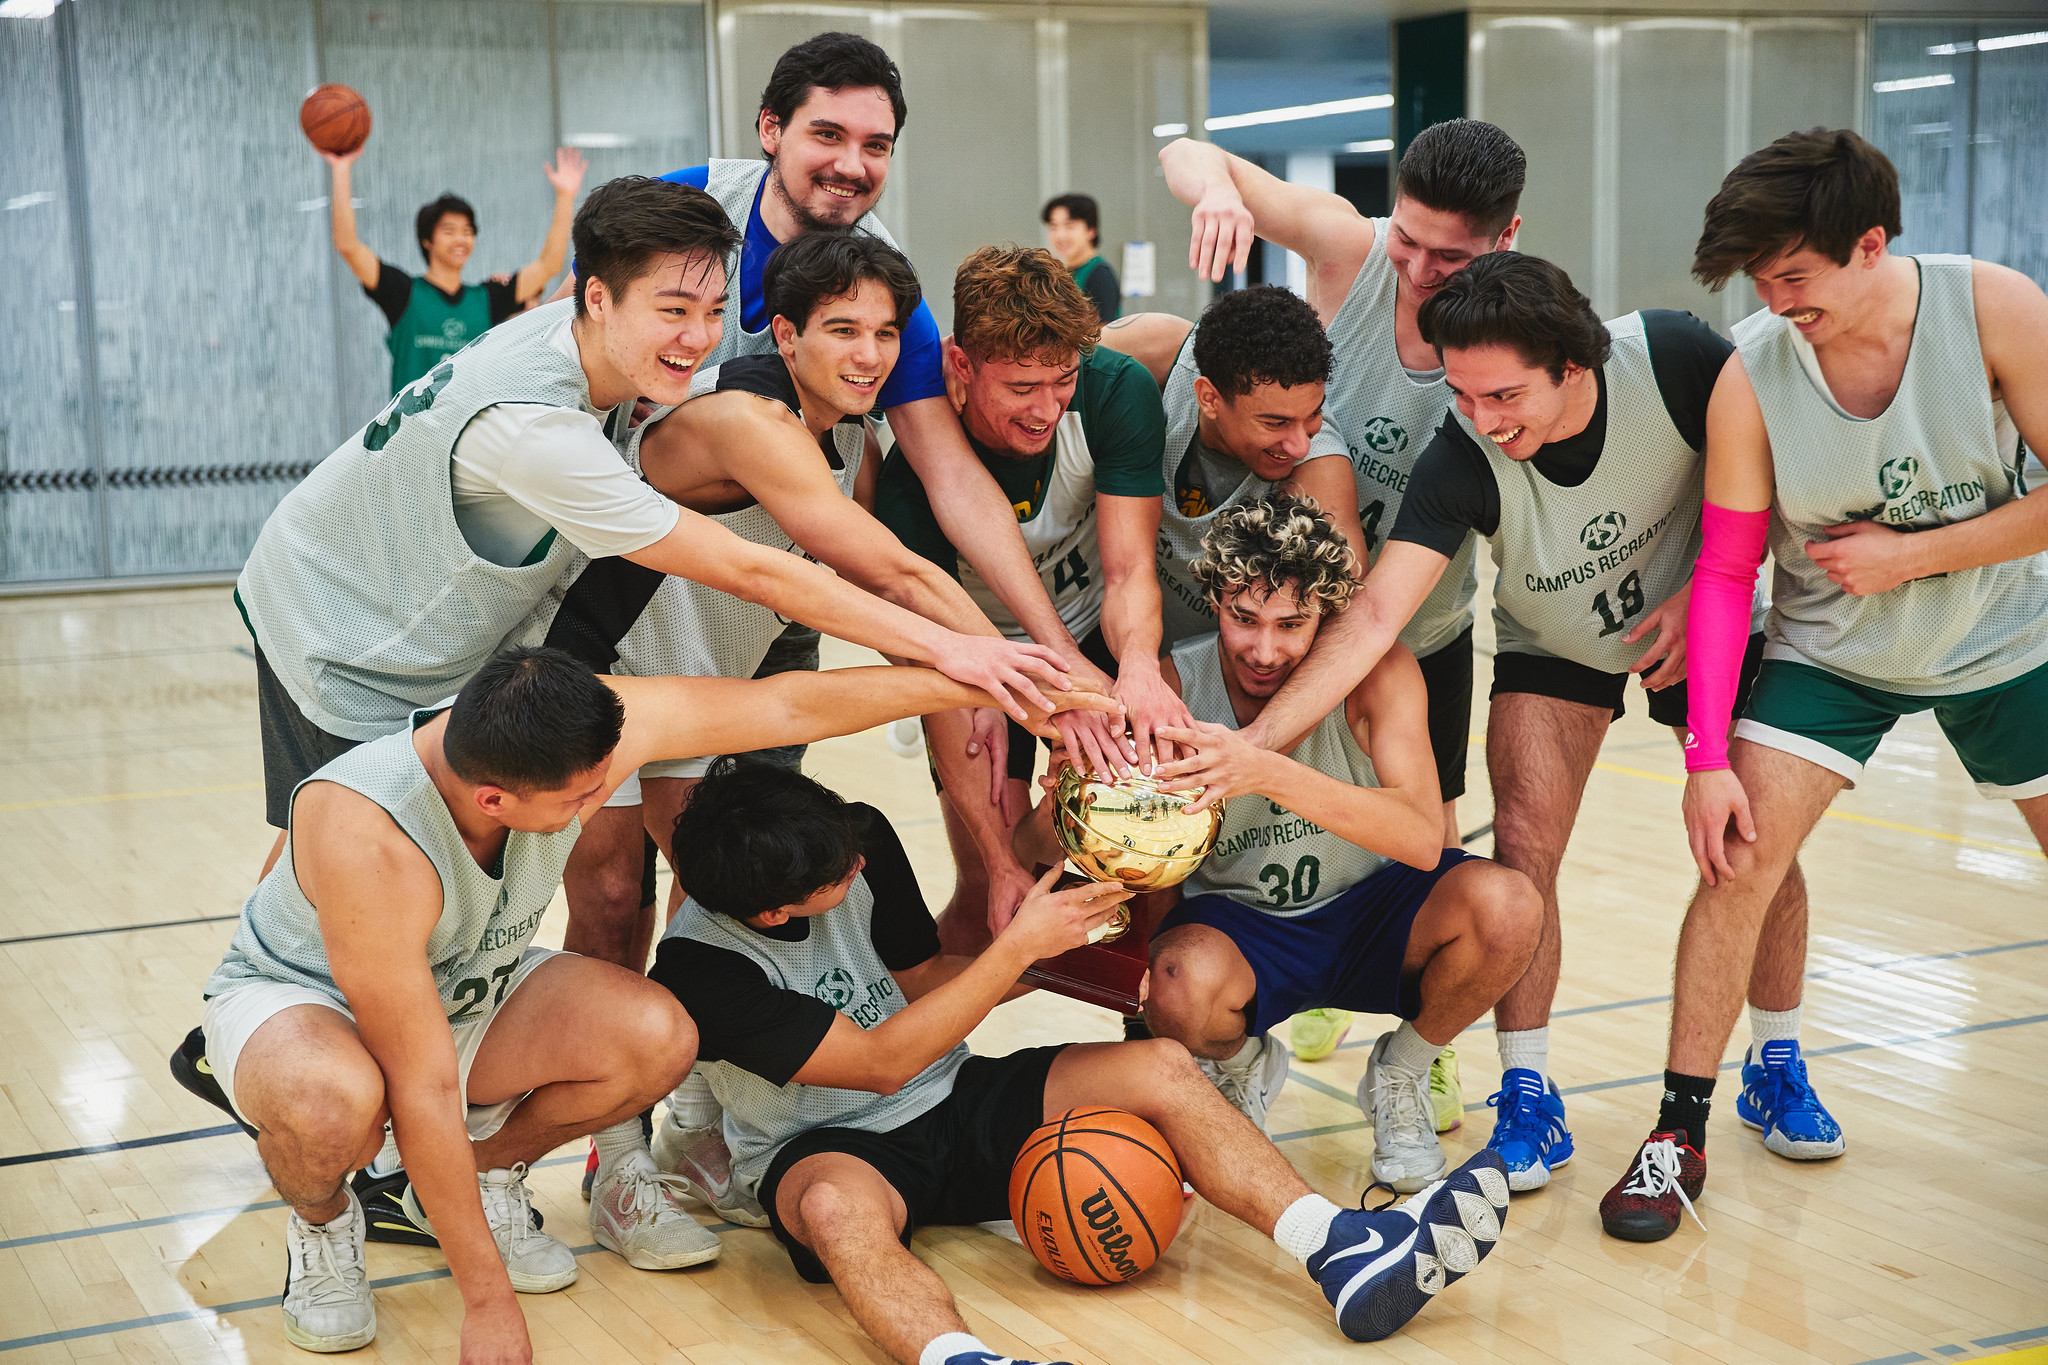 Group of basketball players in grey basketball jerseys holding a trophy.